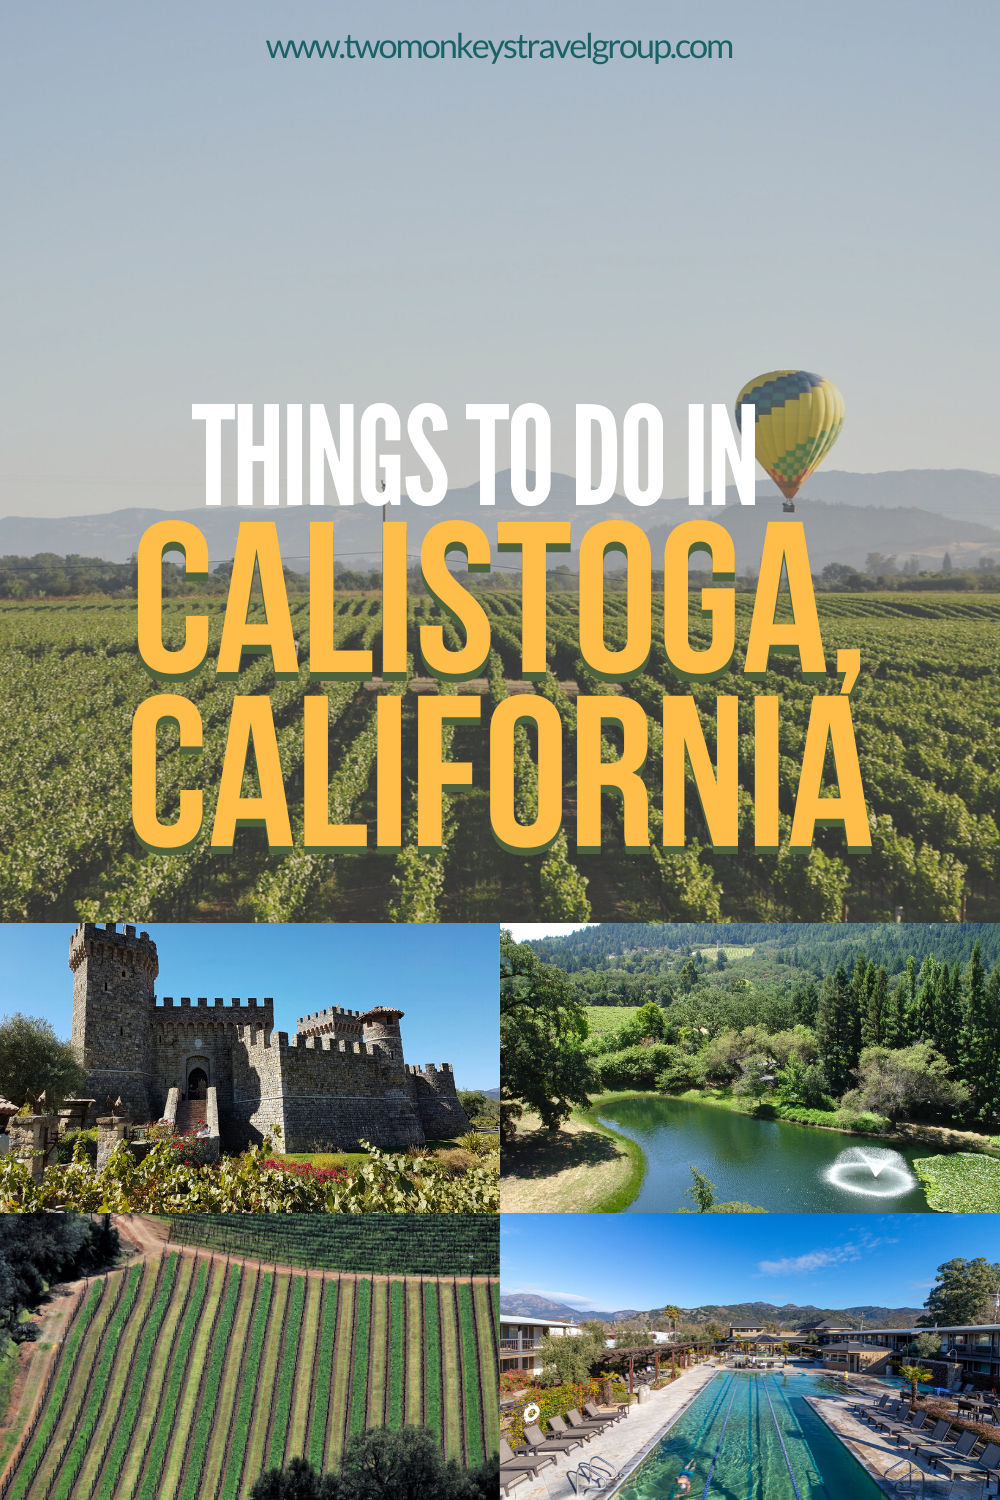 15 Things to do in Calistoga, California [With Suggested Day Tours]